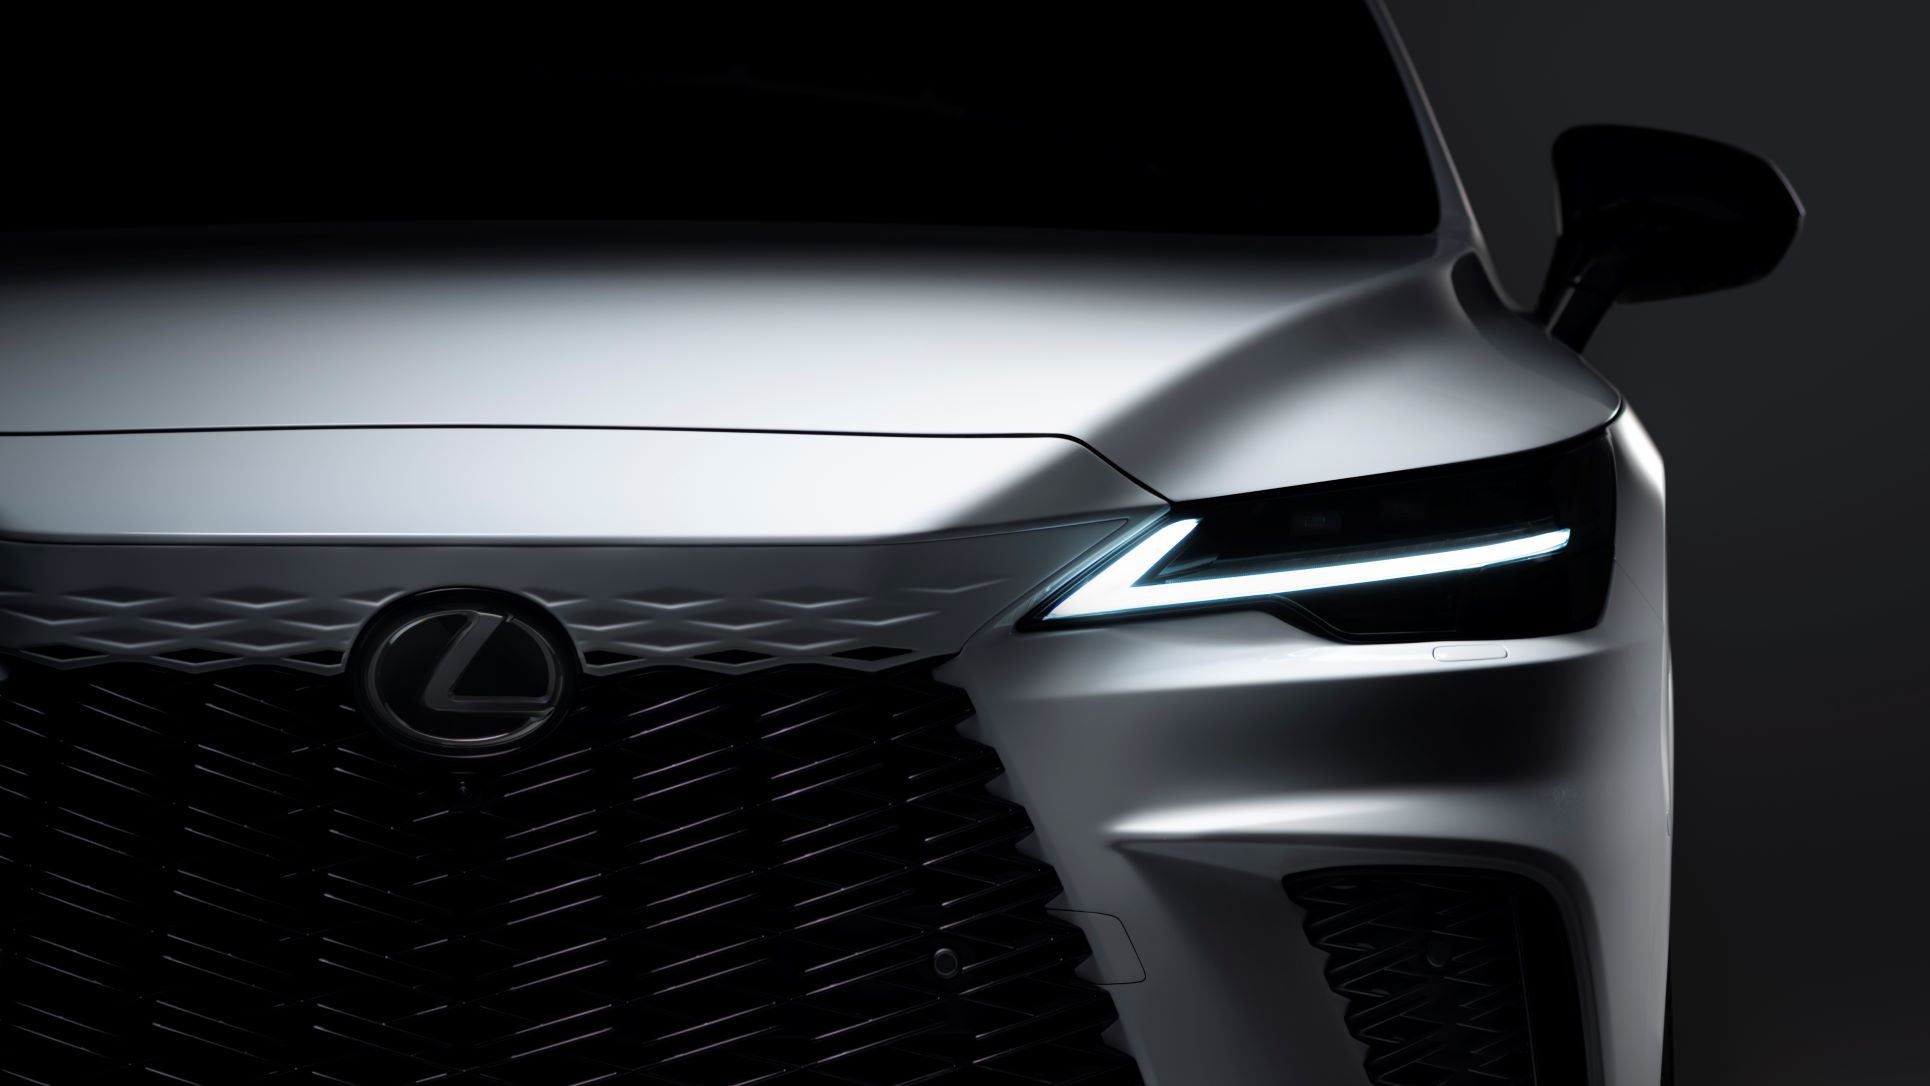 Front teaser image of the new Lexus RX SUV